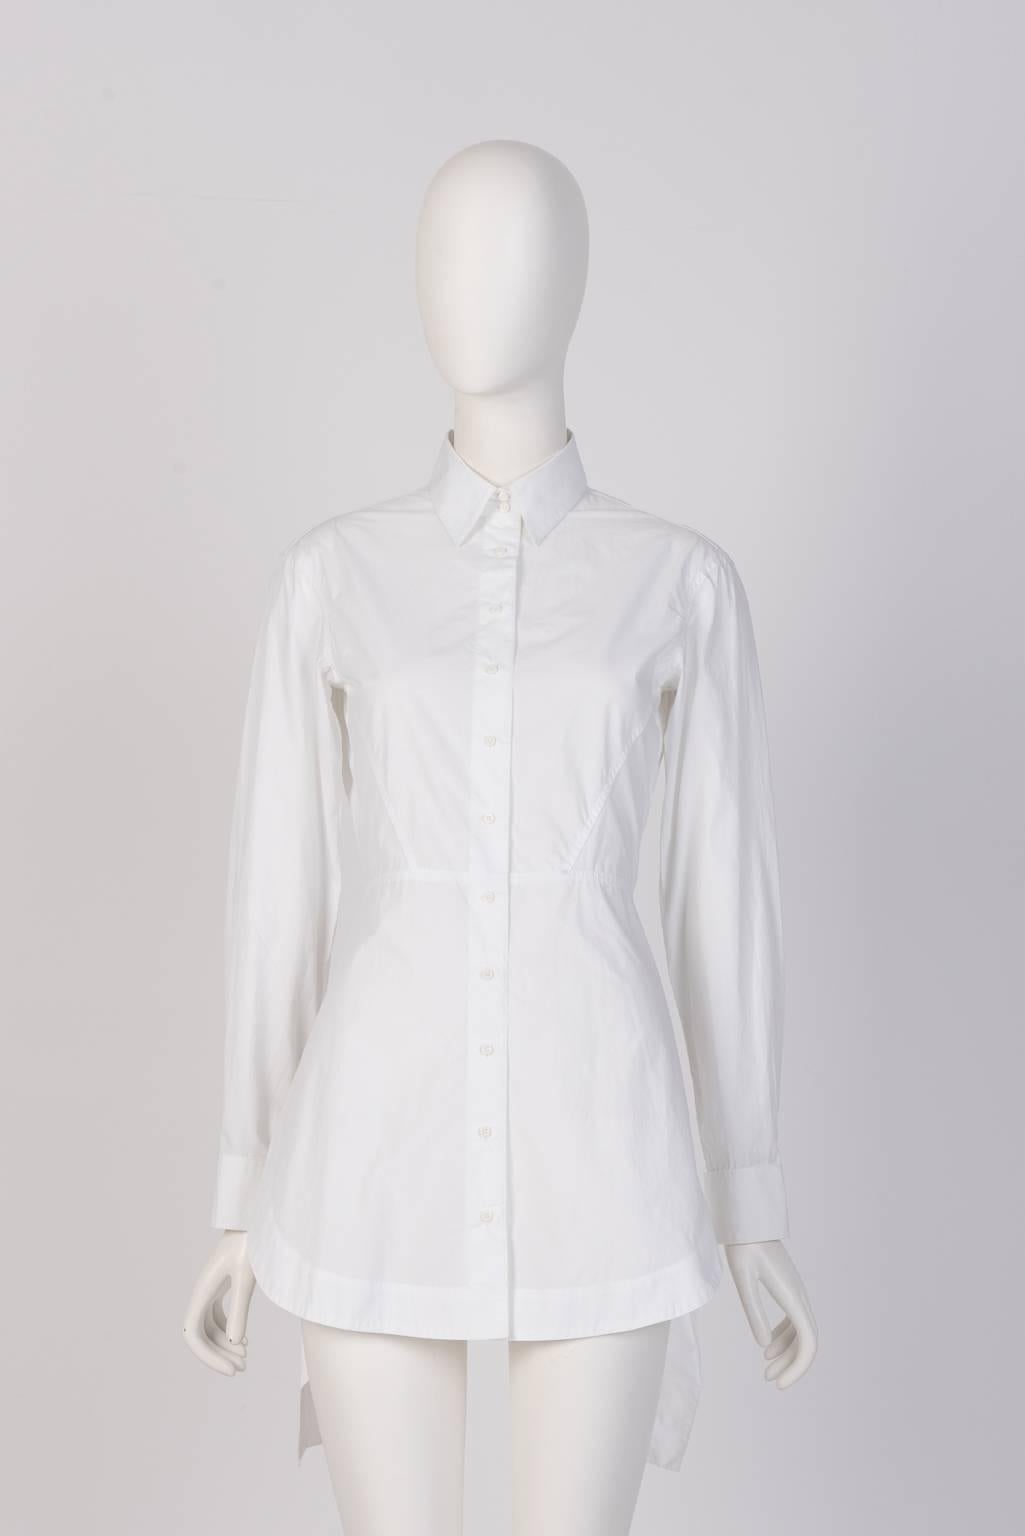 Slim fit Alaïa white cotton shirt featuring a pleated ruffle tail panel at the back.